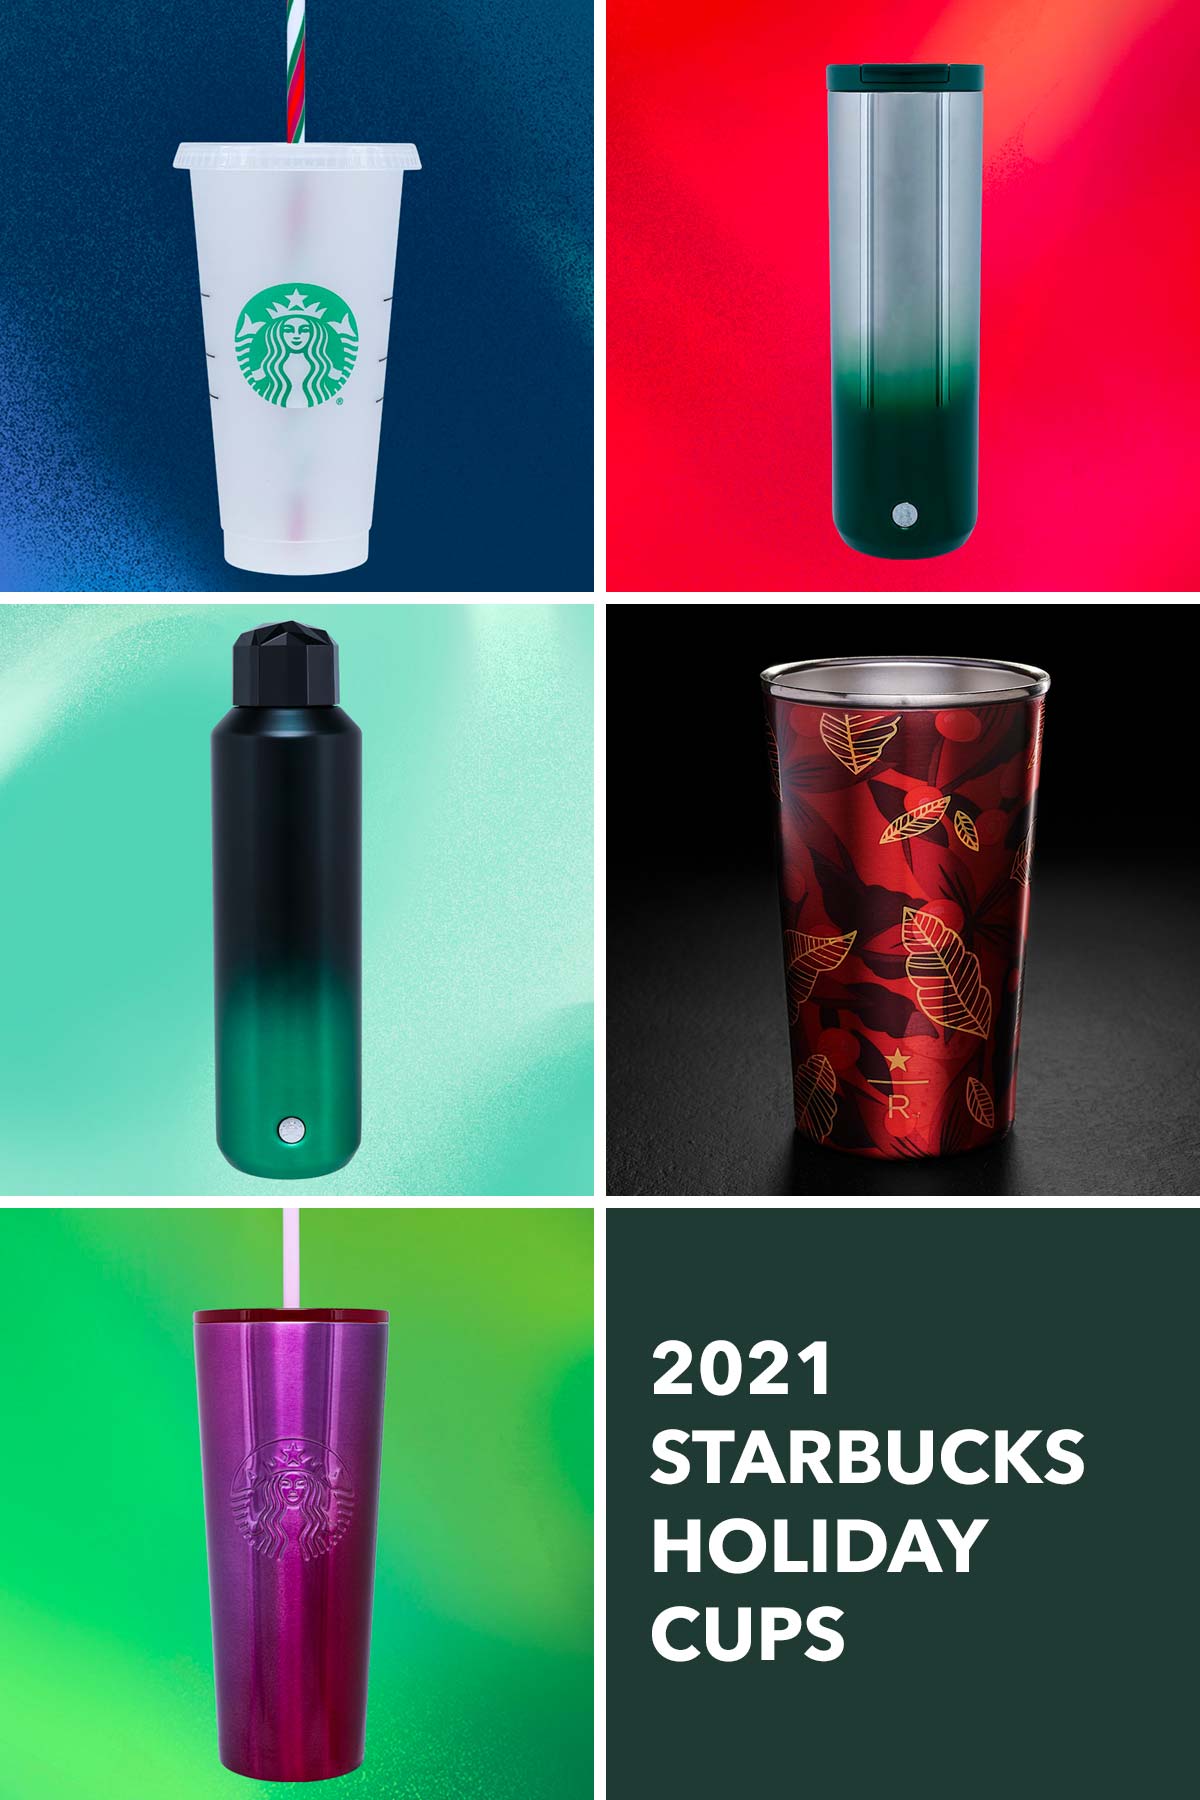 Six photo grid showing five Starbucks holiday cups.